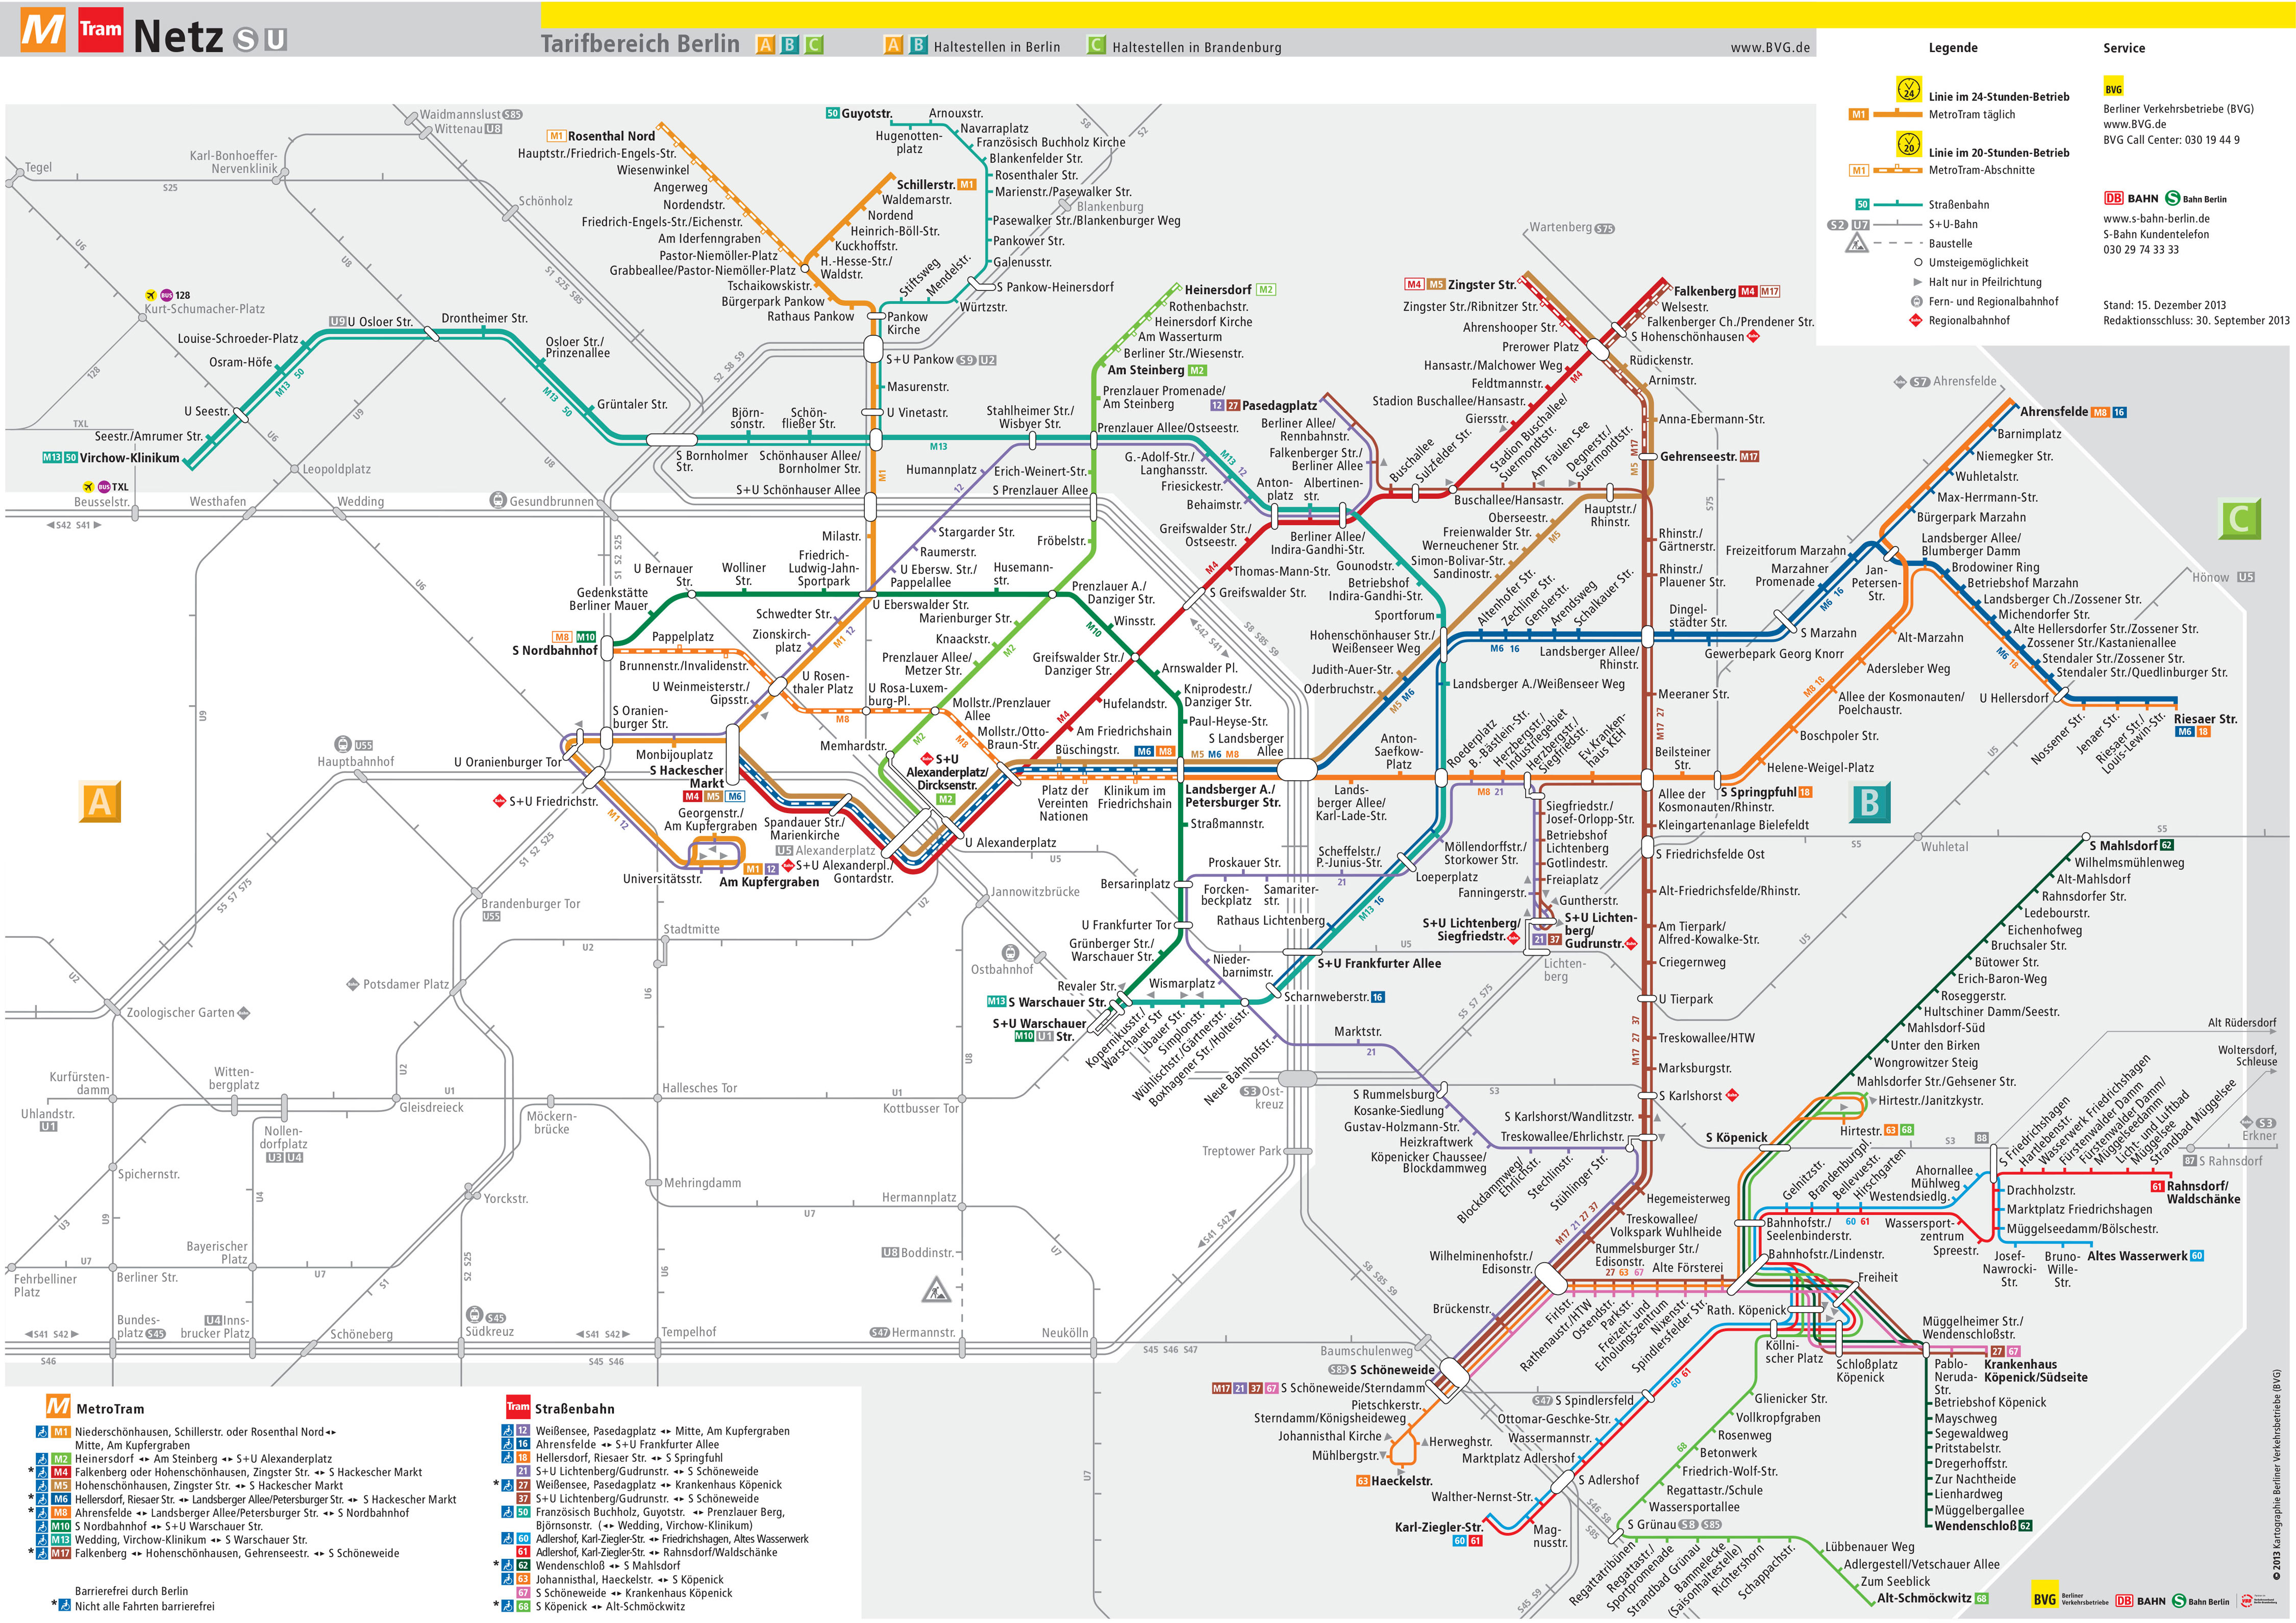 [Berlin]Map of Berlin's extensive Metrotram and Tram system concentrated on the former East Berlin section of the city.  